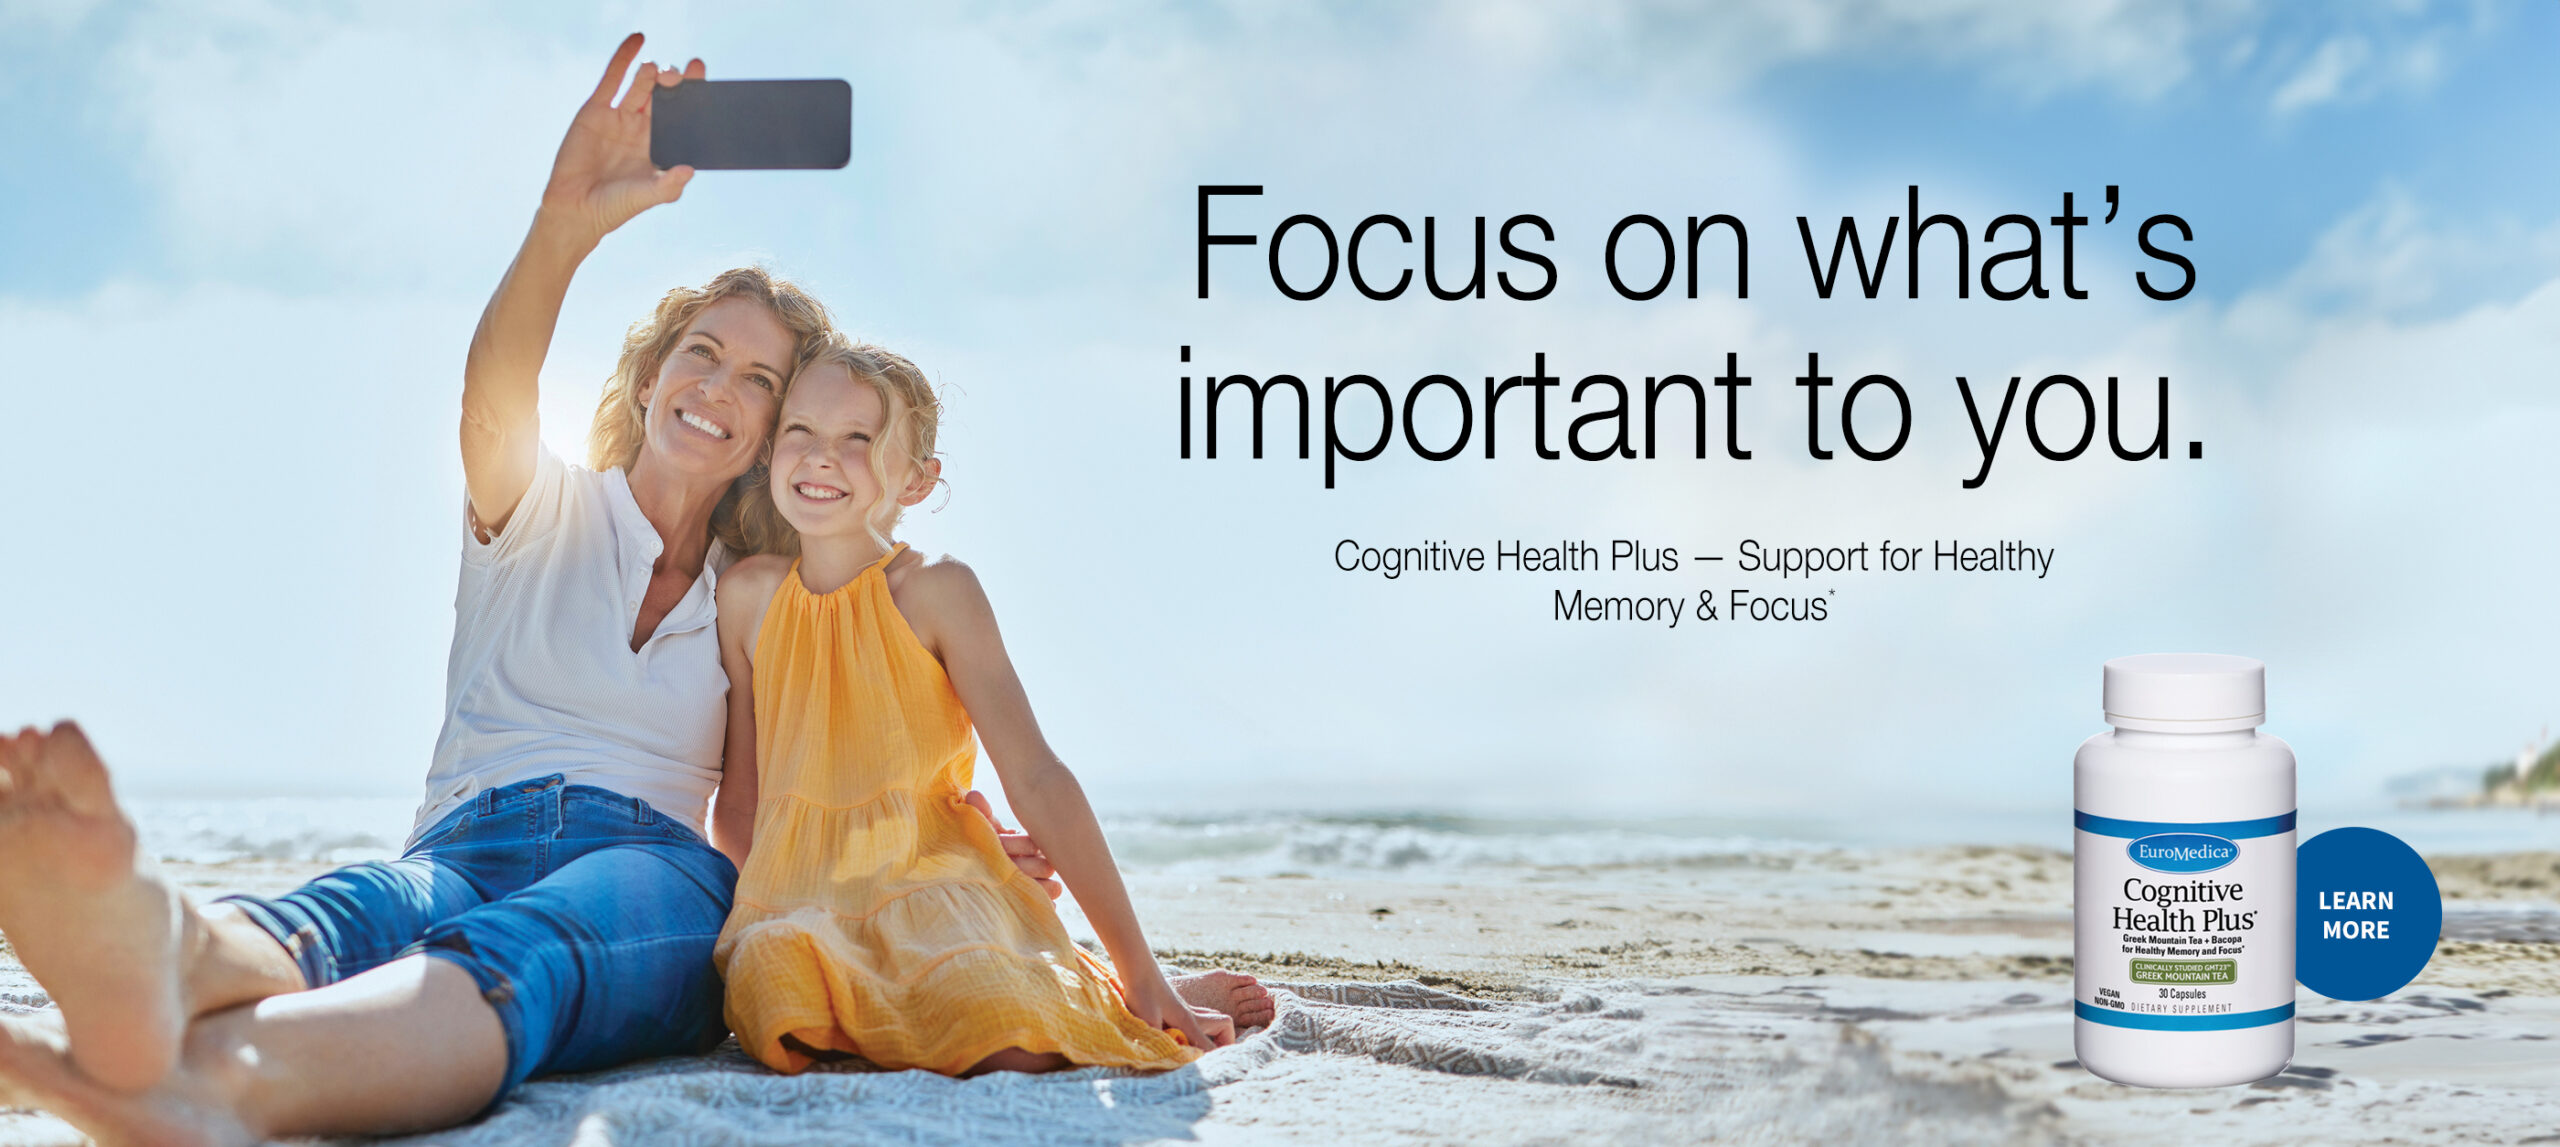 Focus on what's important to you, with Cognitive Health Plus. Learn more.